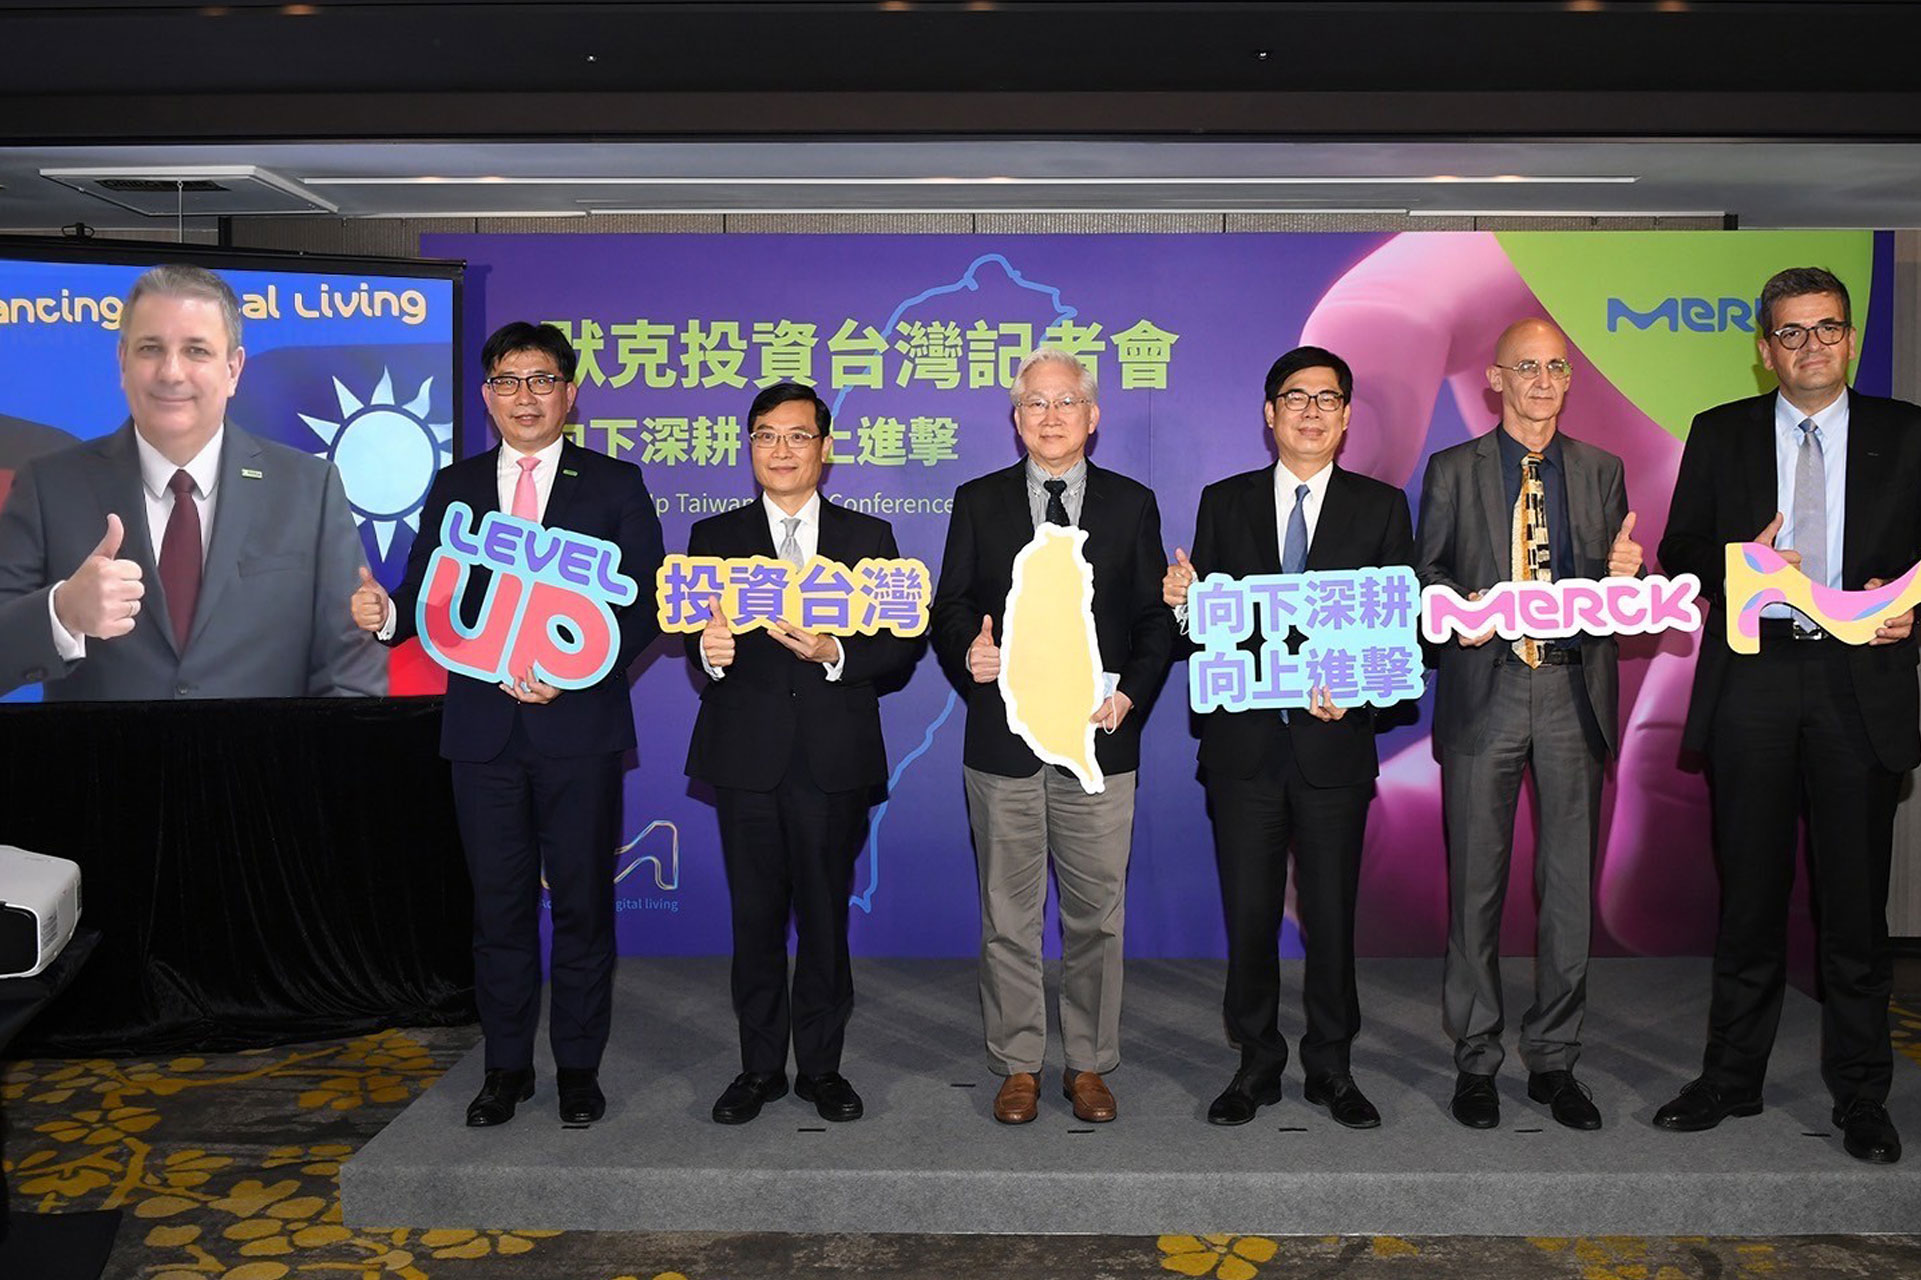 Merck announced to invest NTD 17 billion in Taiwan (The largest-ever investment since 1989) Photo-1